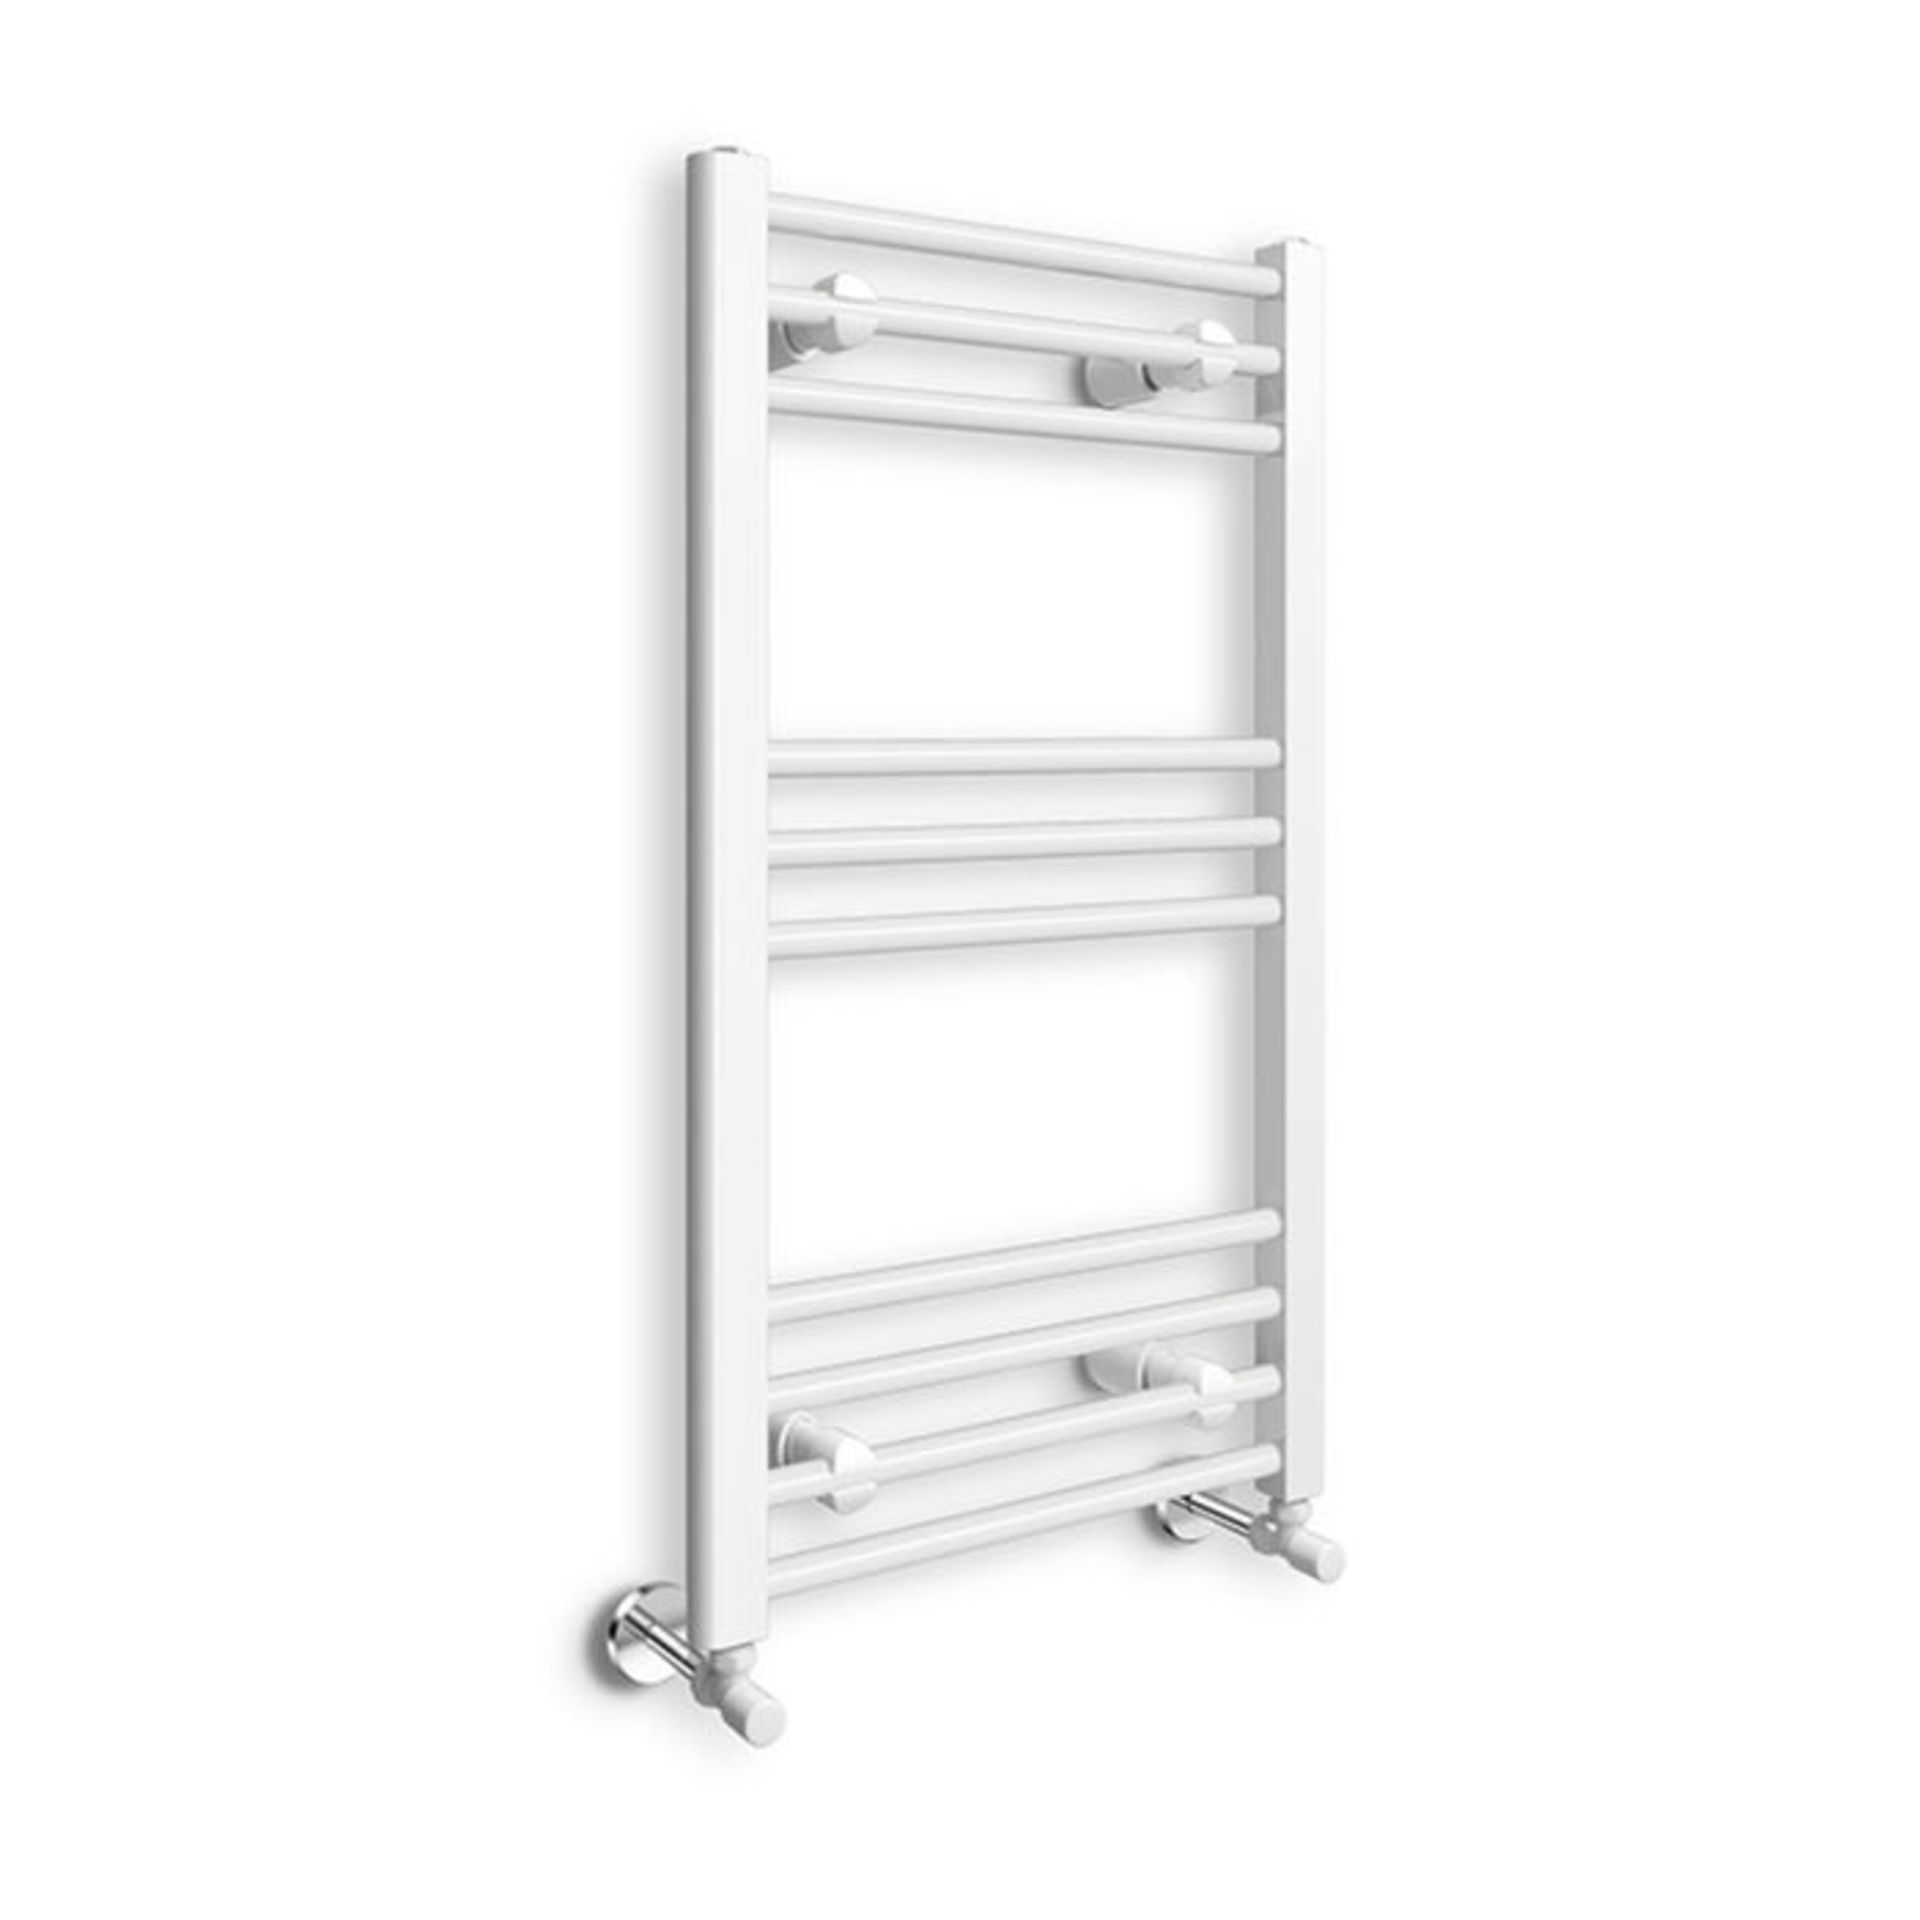 (XX92) 1100x500mm White Matt Heated Towel Radiator. . Made from low carbon steel Finished with...(